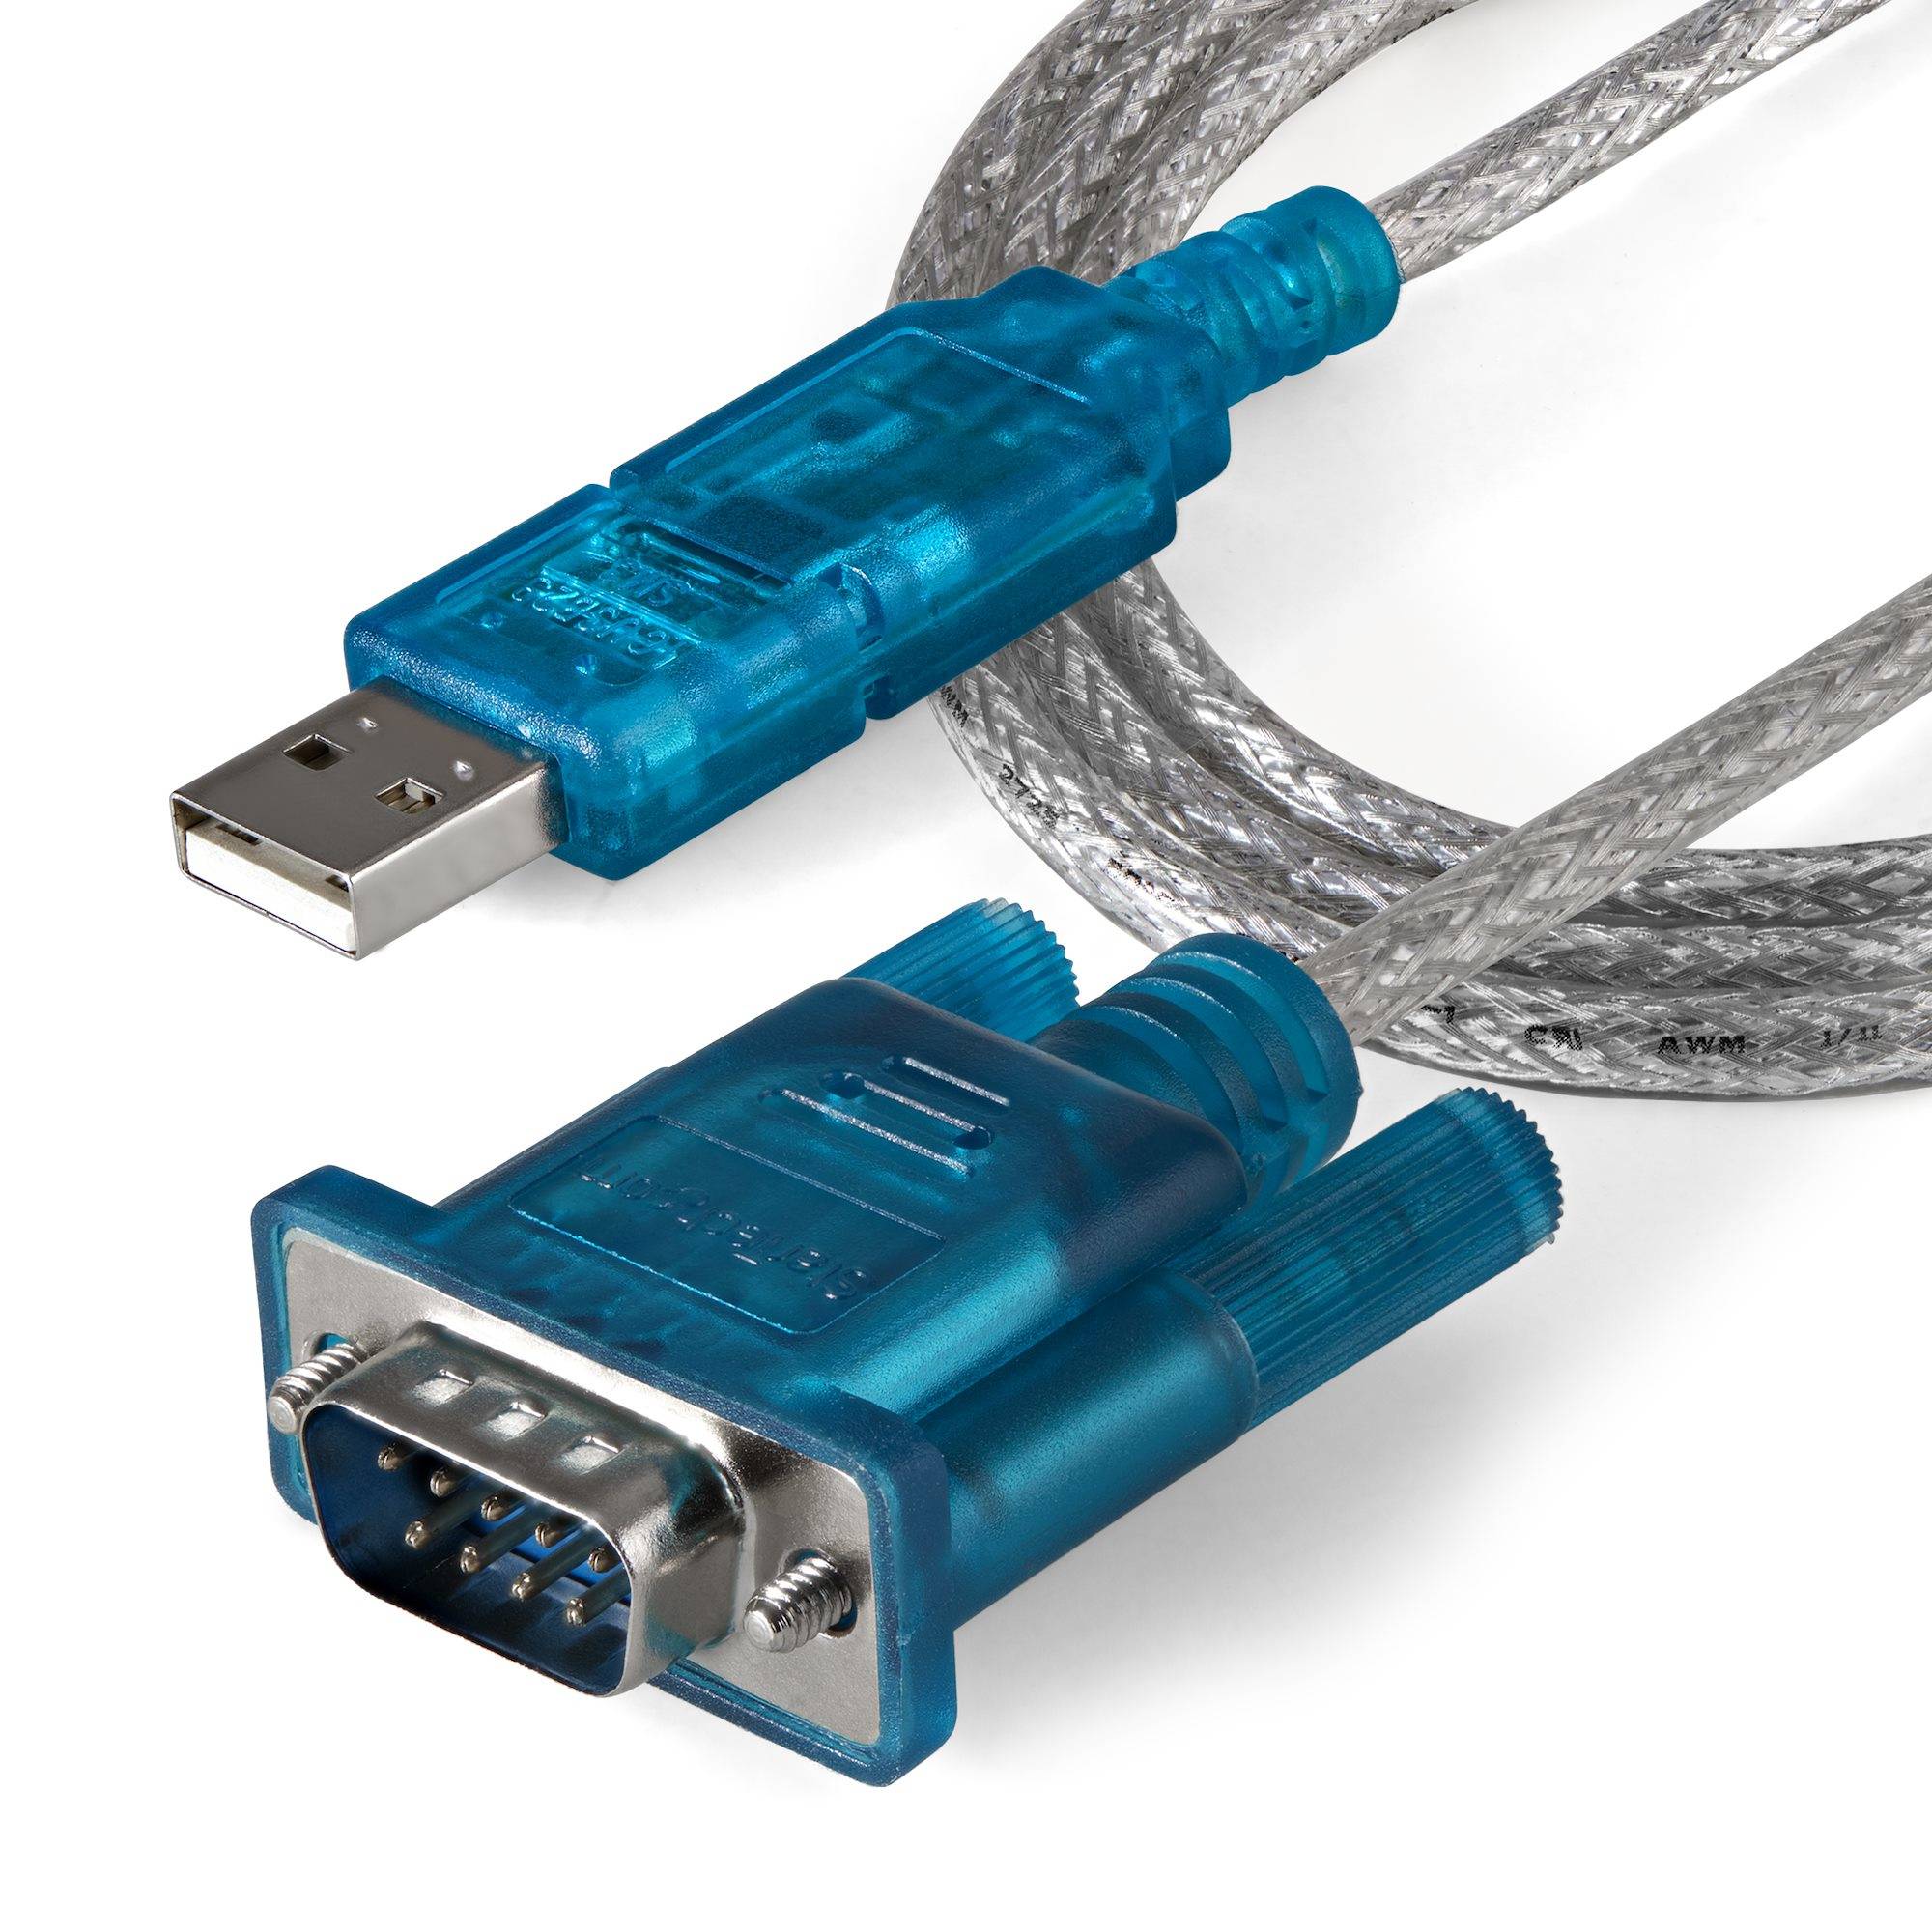 Rca Informatique - image du produit : USB TO SERIAL ADAPTER CABLE USB TO RS232 DB9 M/M